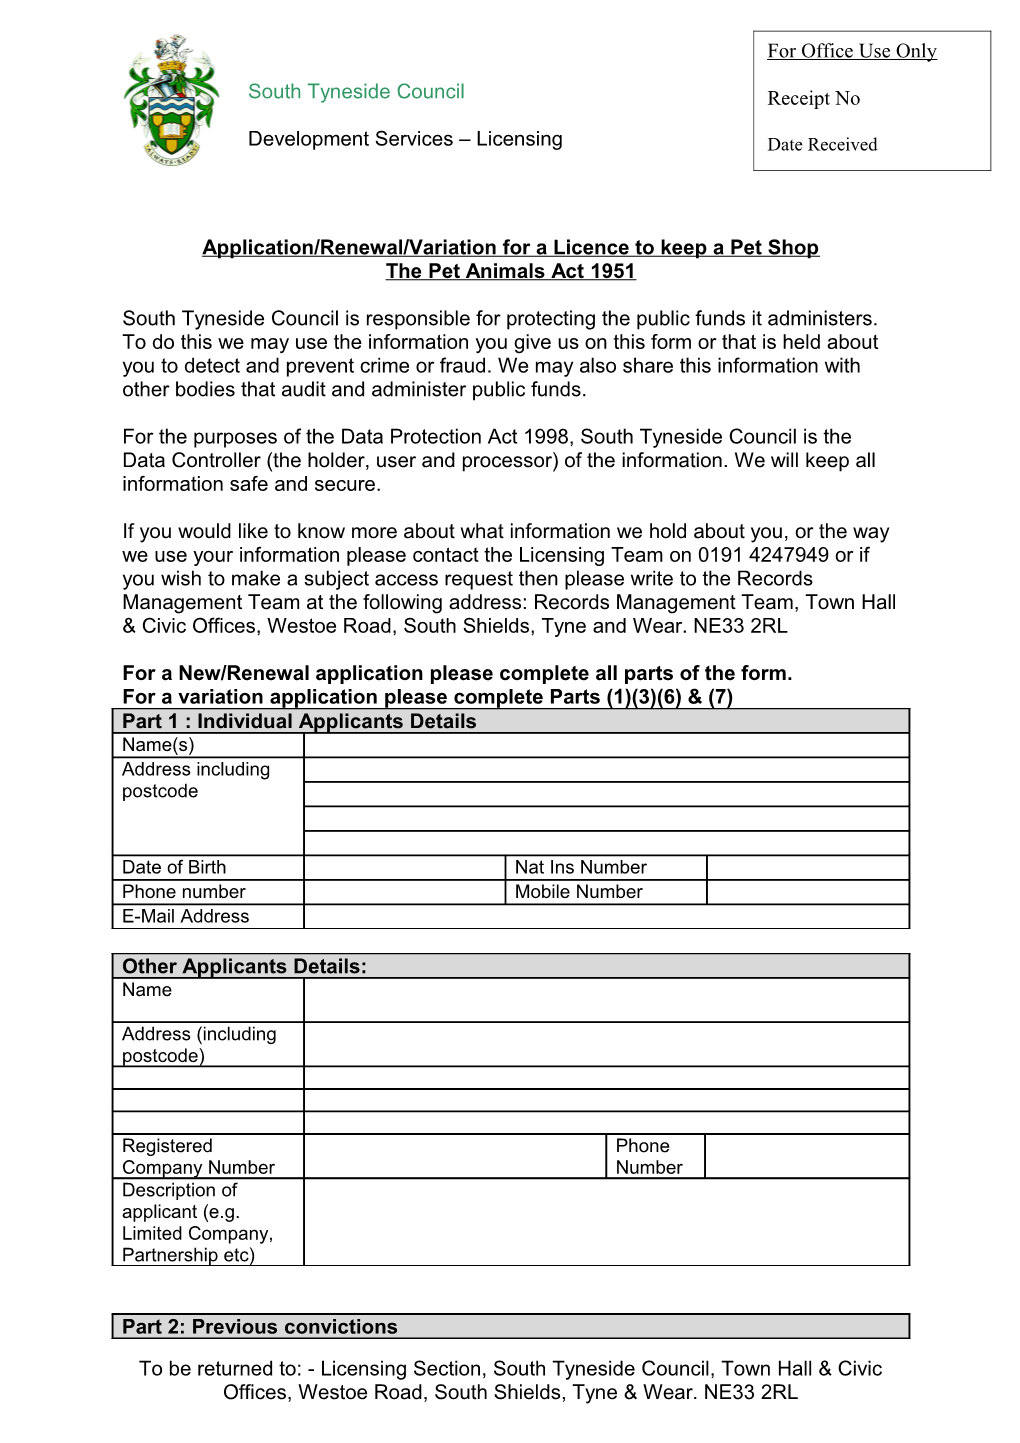 Application/Renewal/Variation for a Licence to Keep a Pet Shop